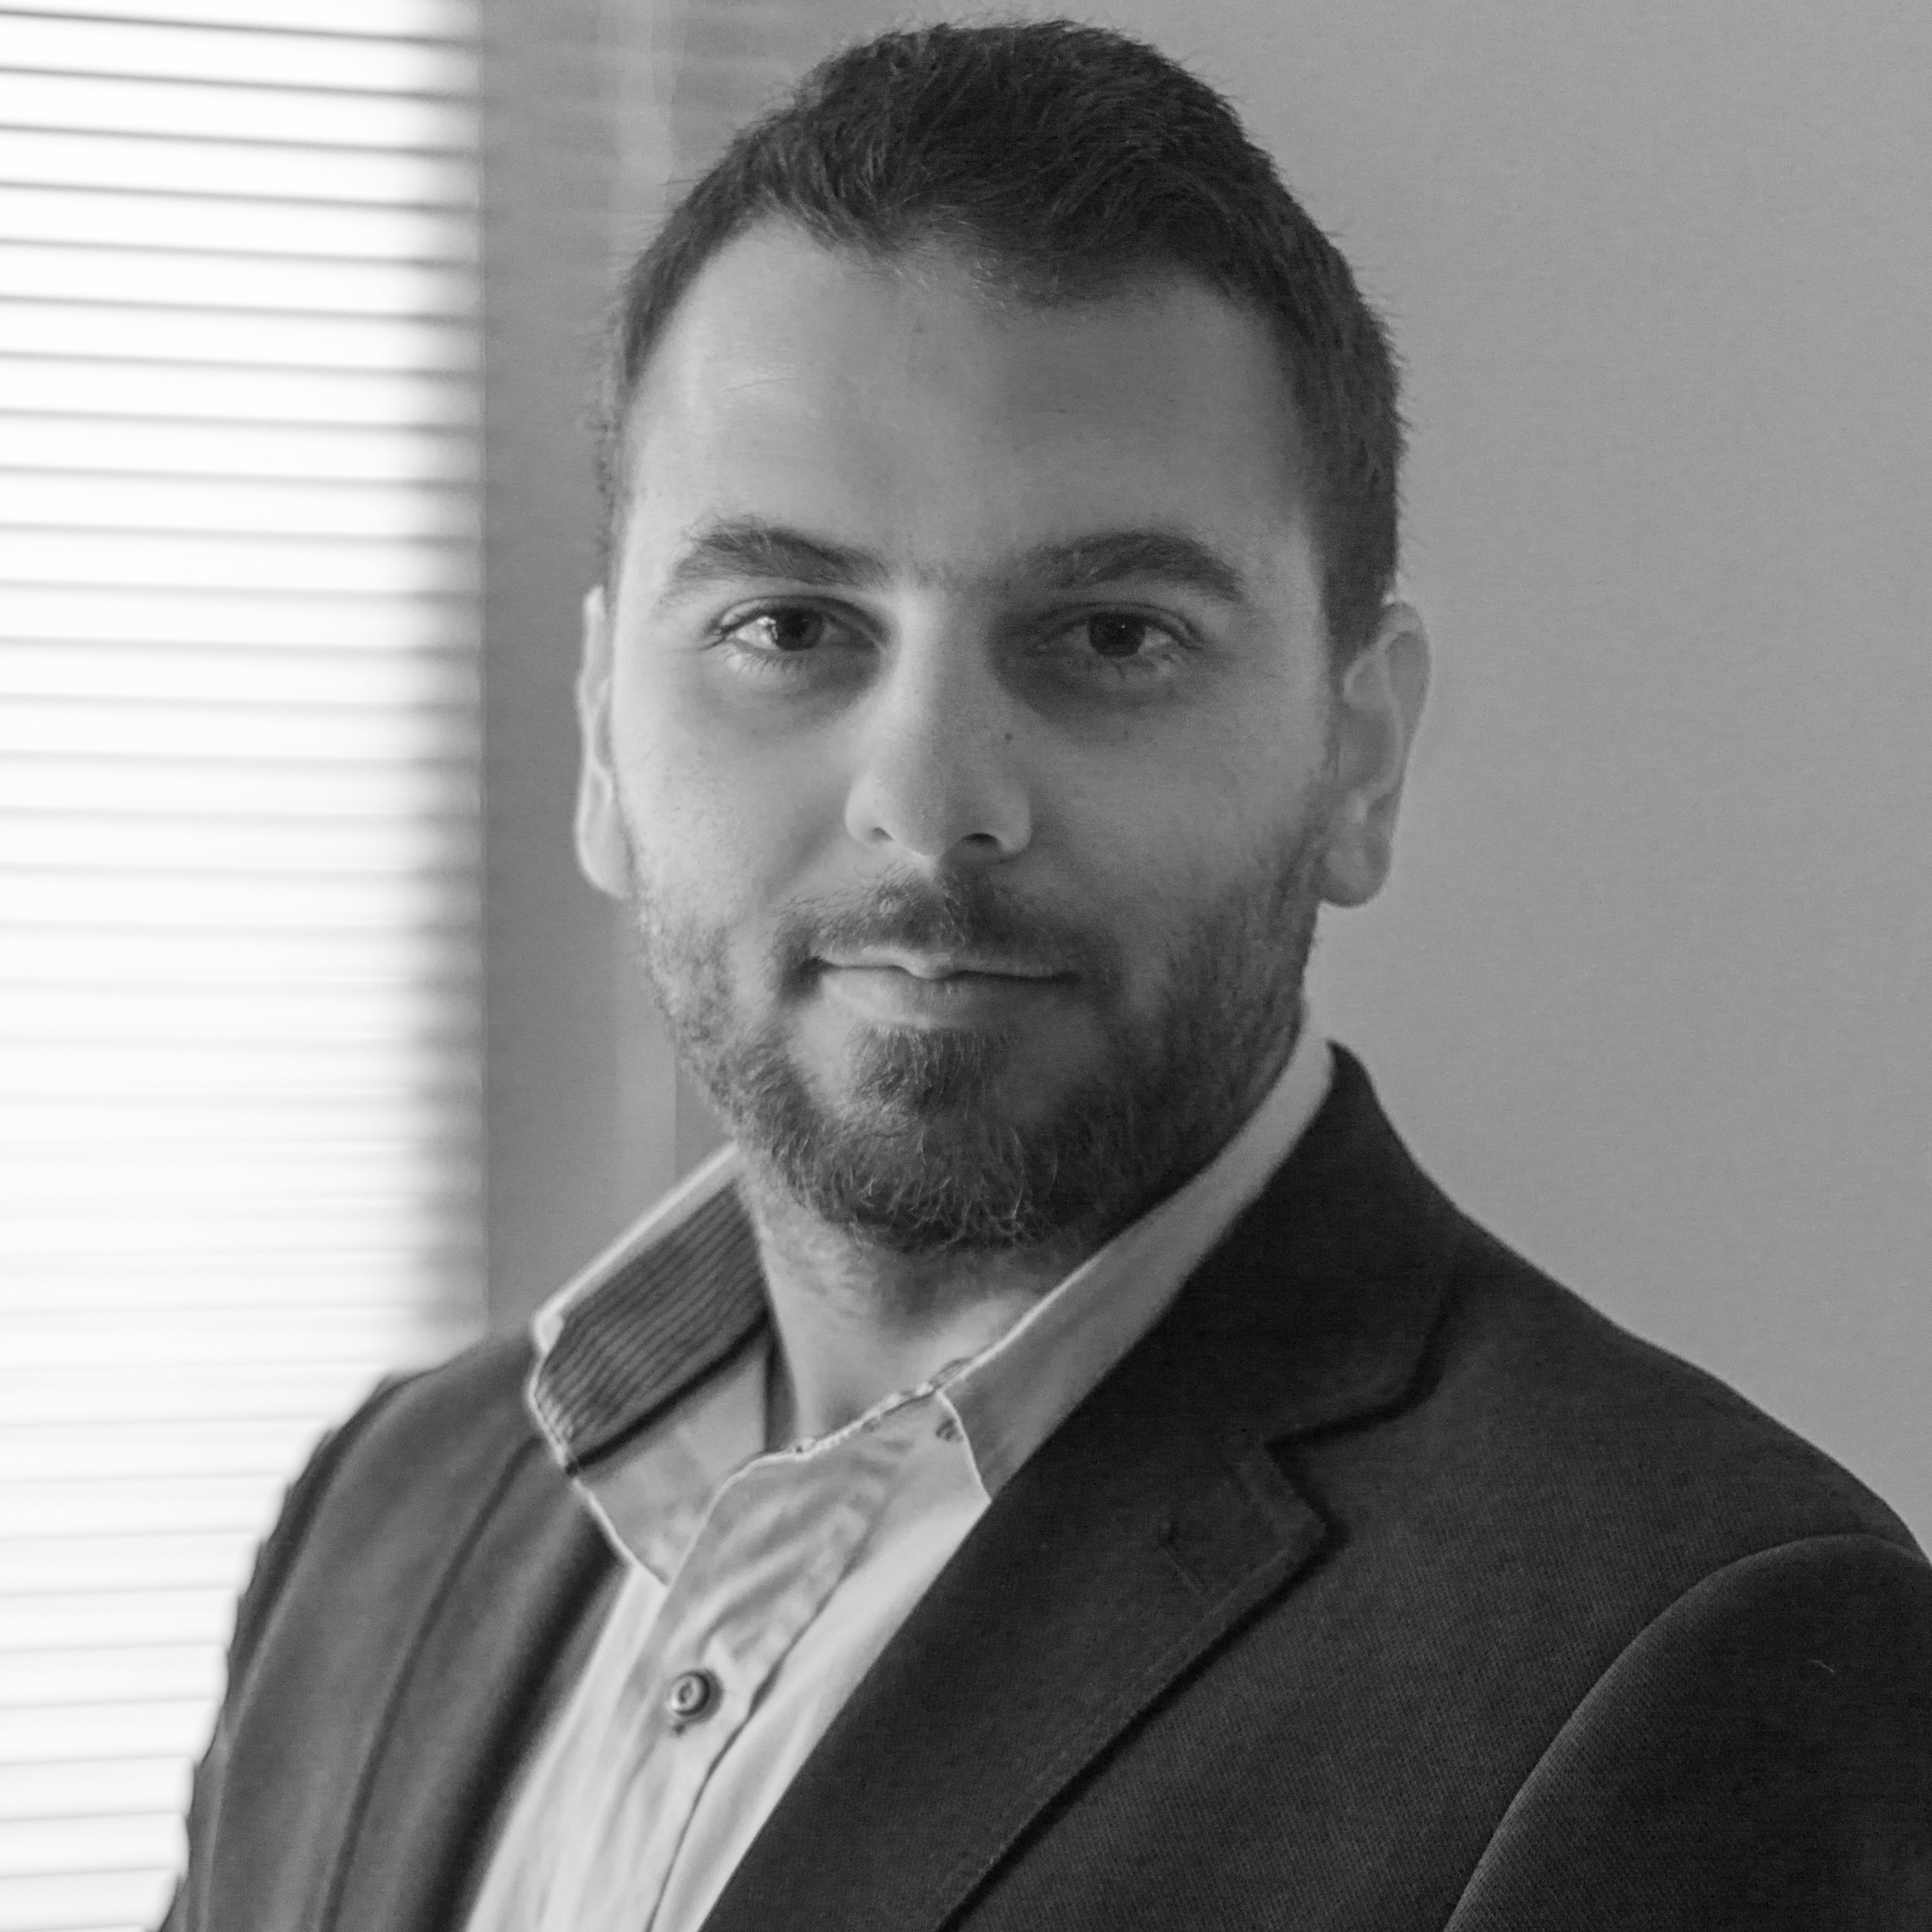 Motorsport.com today announced the appointment of Khodr Rawi as Director of Motorsport.com - MIDDLE EAST. Rawi will lead the direction of all regional motorsports content and report to the brand's Editor in Chief, Charles Bradley.